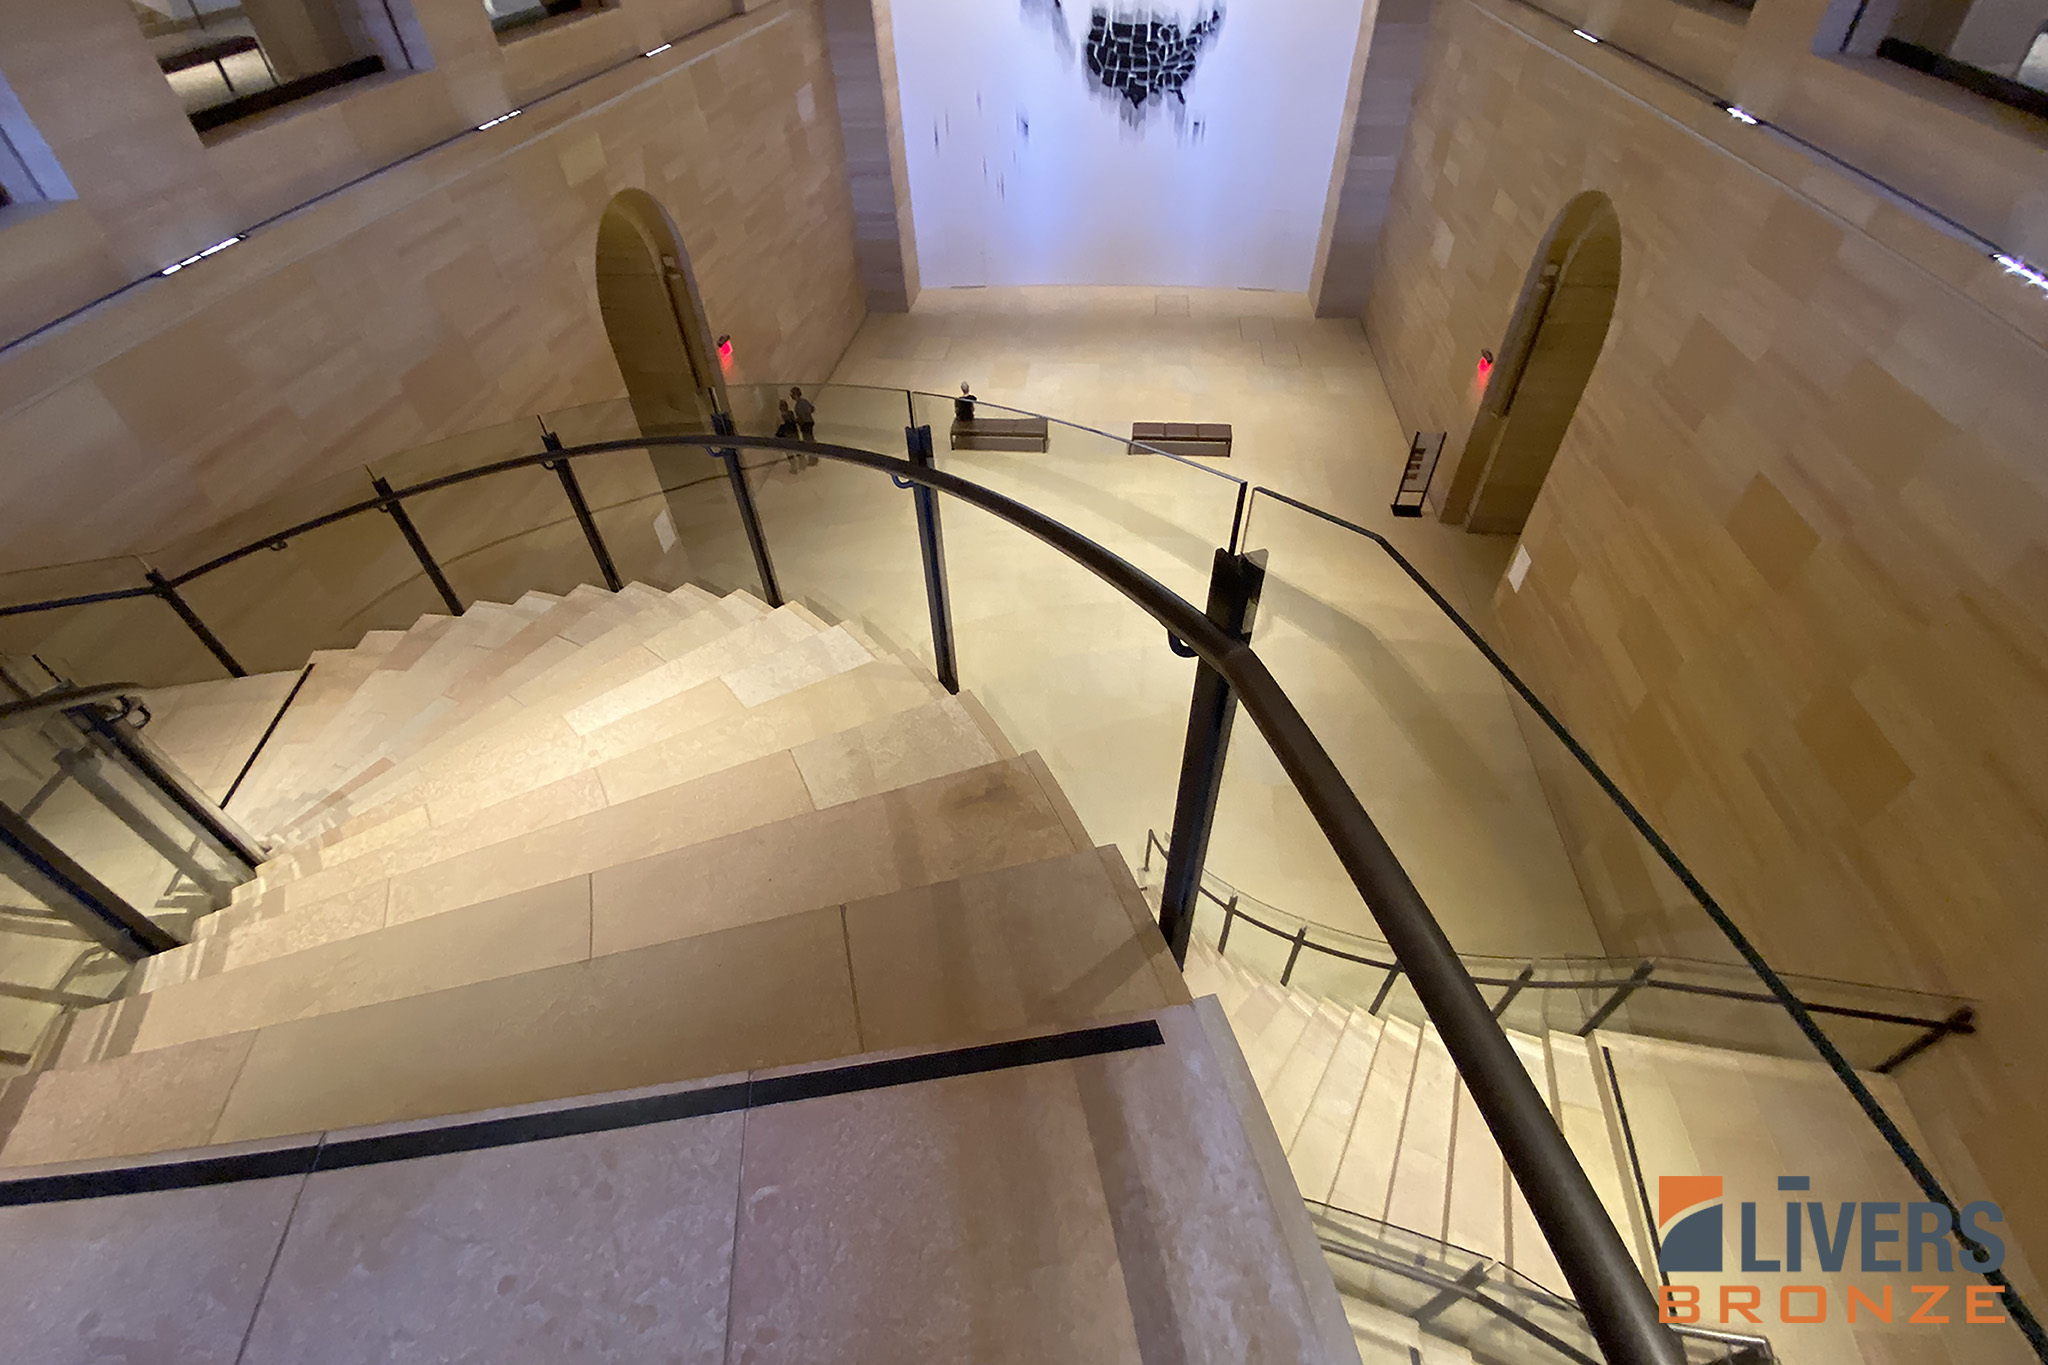 Livers Bronze Custom Bronze Railings were installed at the Lobby Stairs at the Philadelphia Museum of Art and were made in the USA.